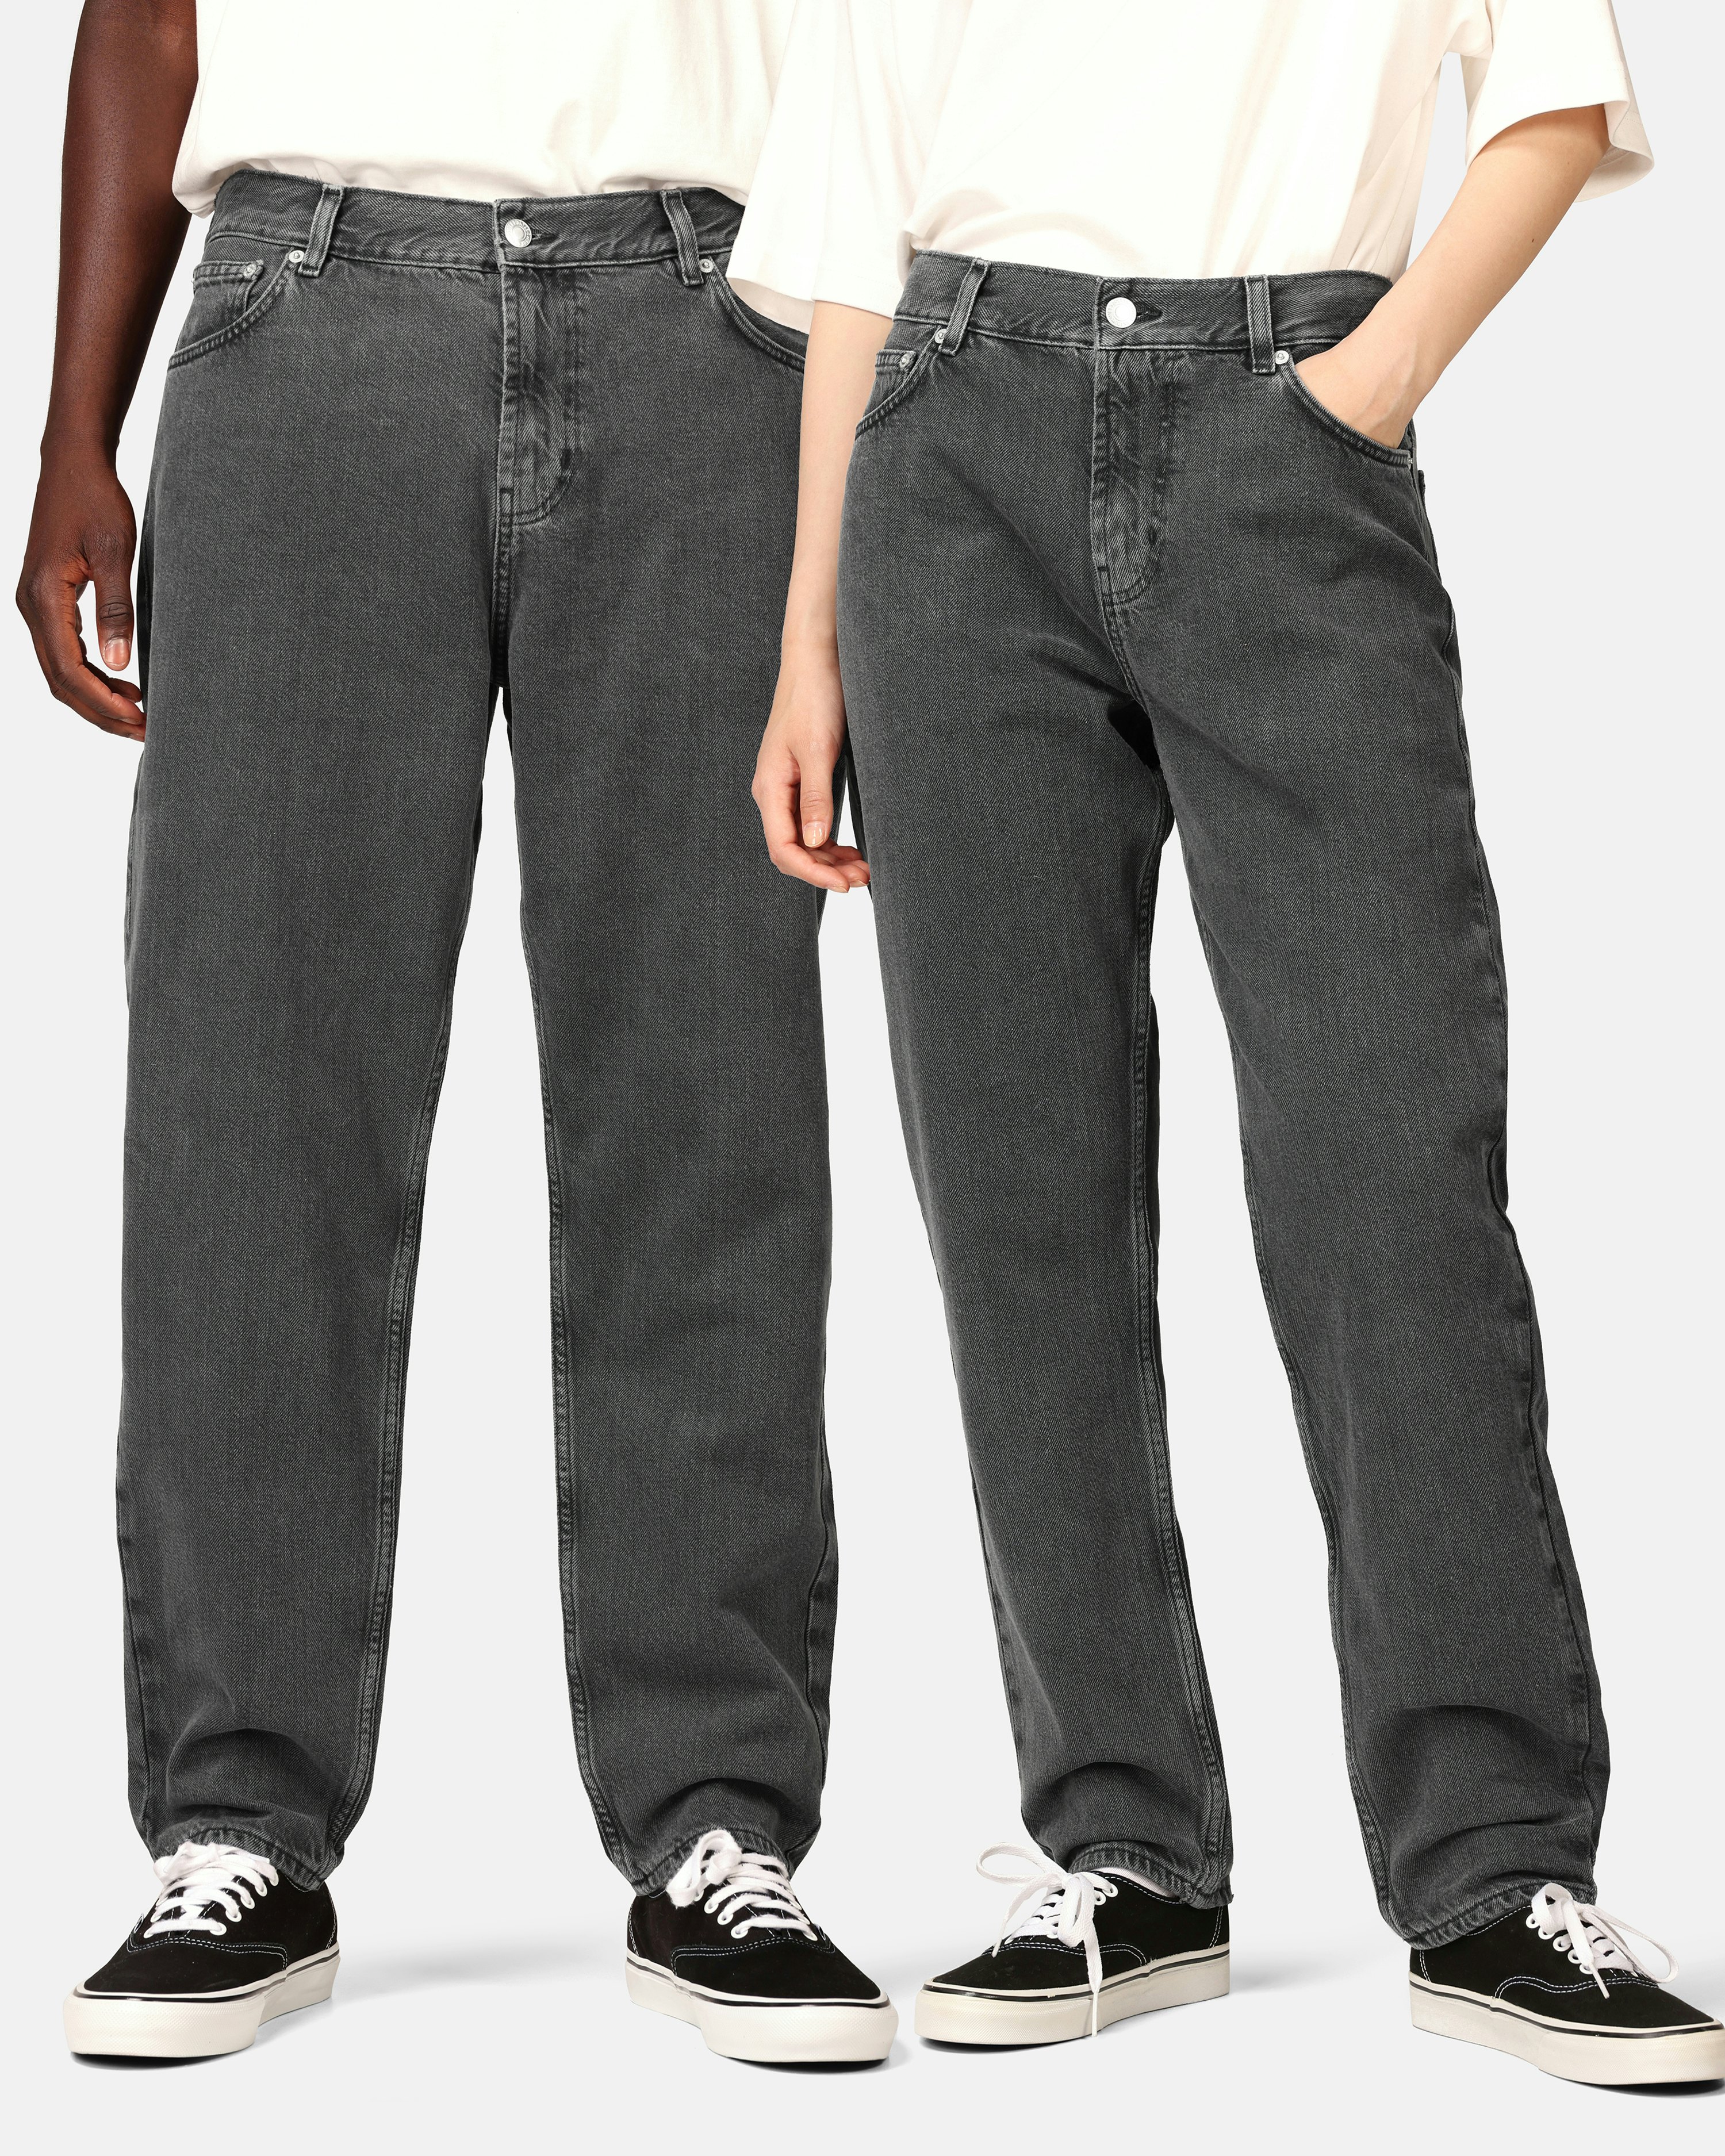 Levi's Stay Loose Denim Jeans - Weedless Hook Black, Levi's Stay Loose  Denim Jeans, Buy Jeans